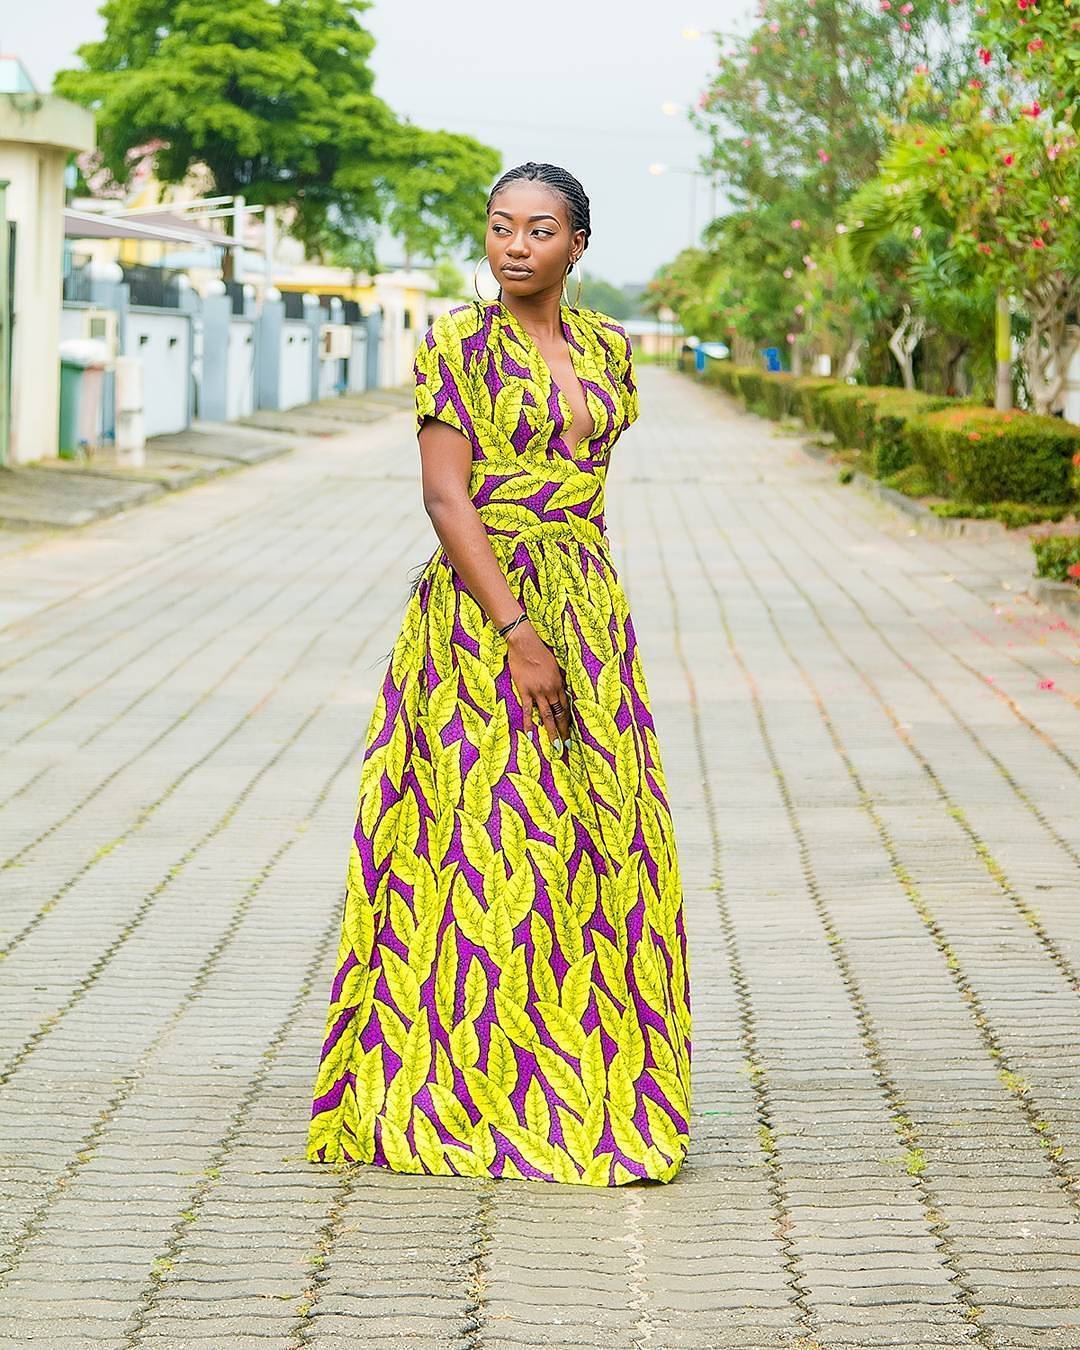  You Too Can Look Hot In These Ankara Styles